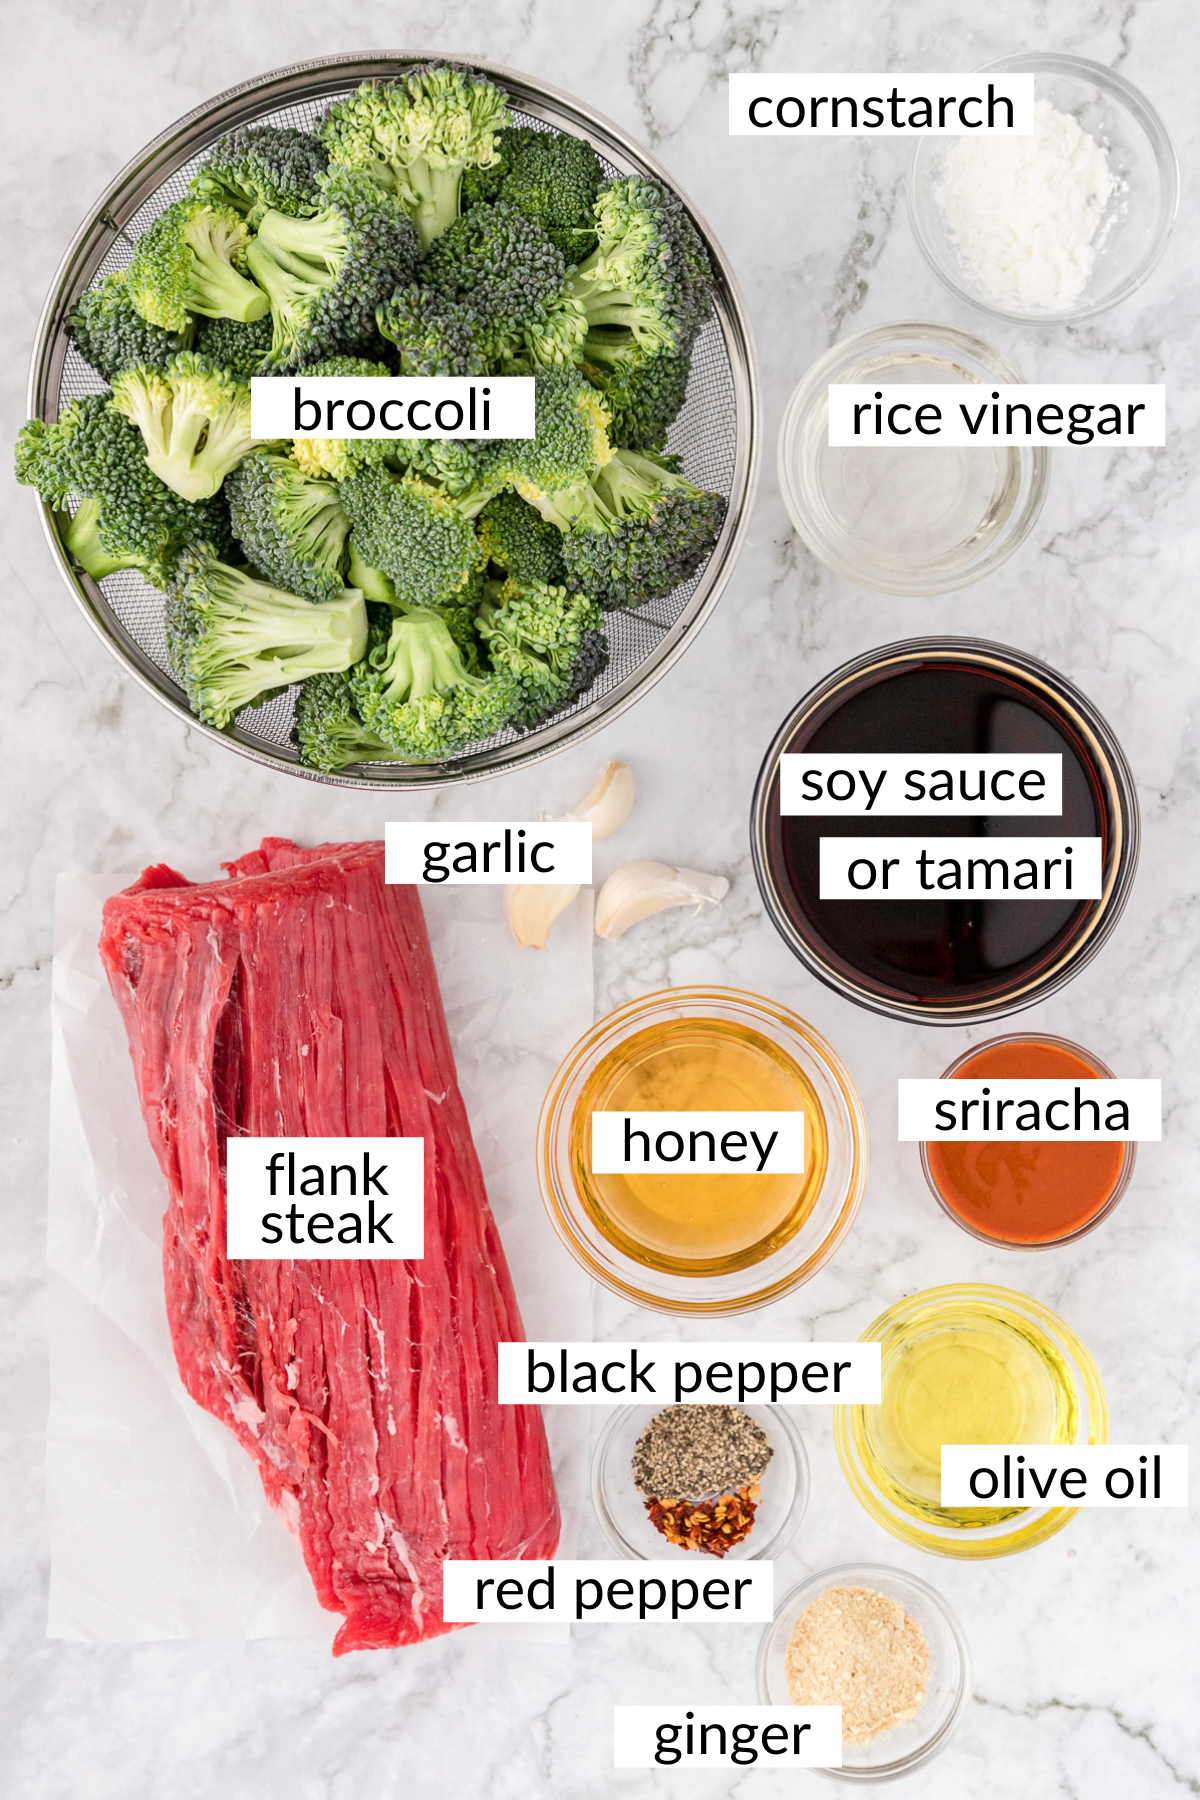 beef and broccoli ingredients